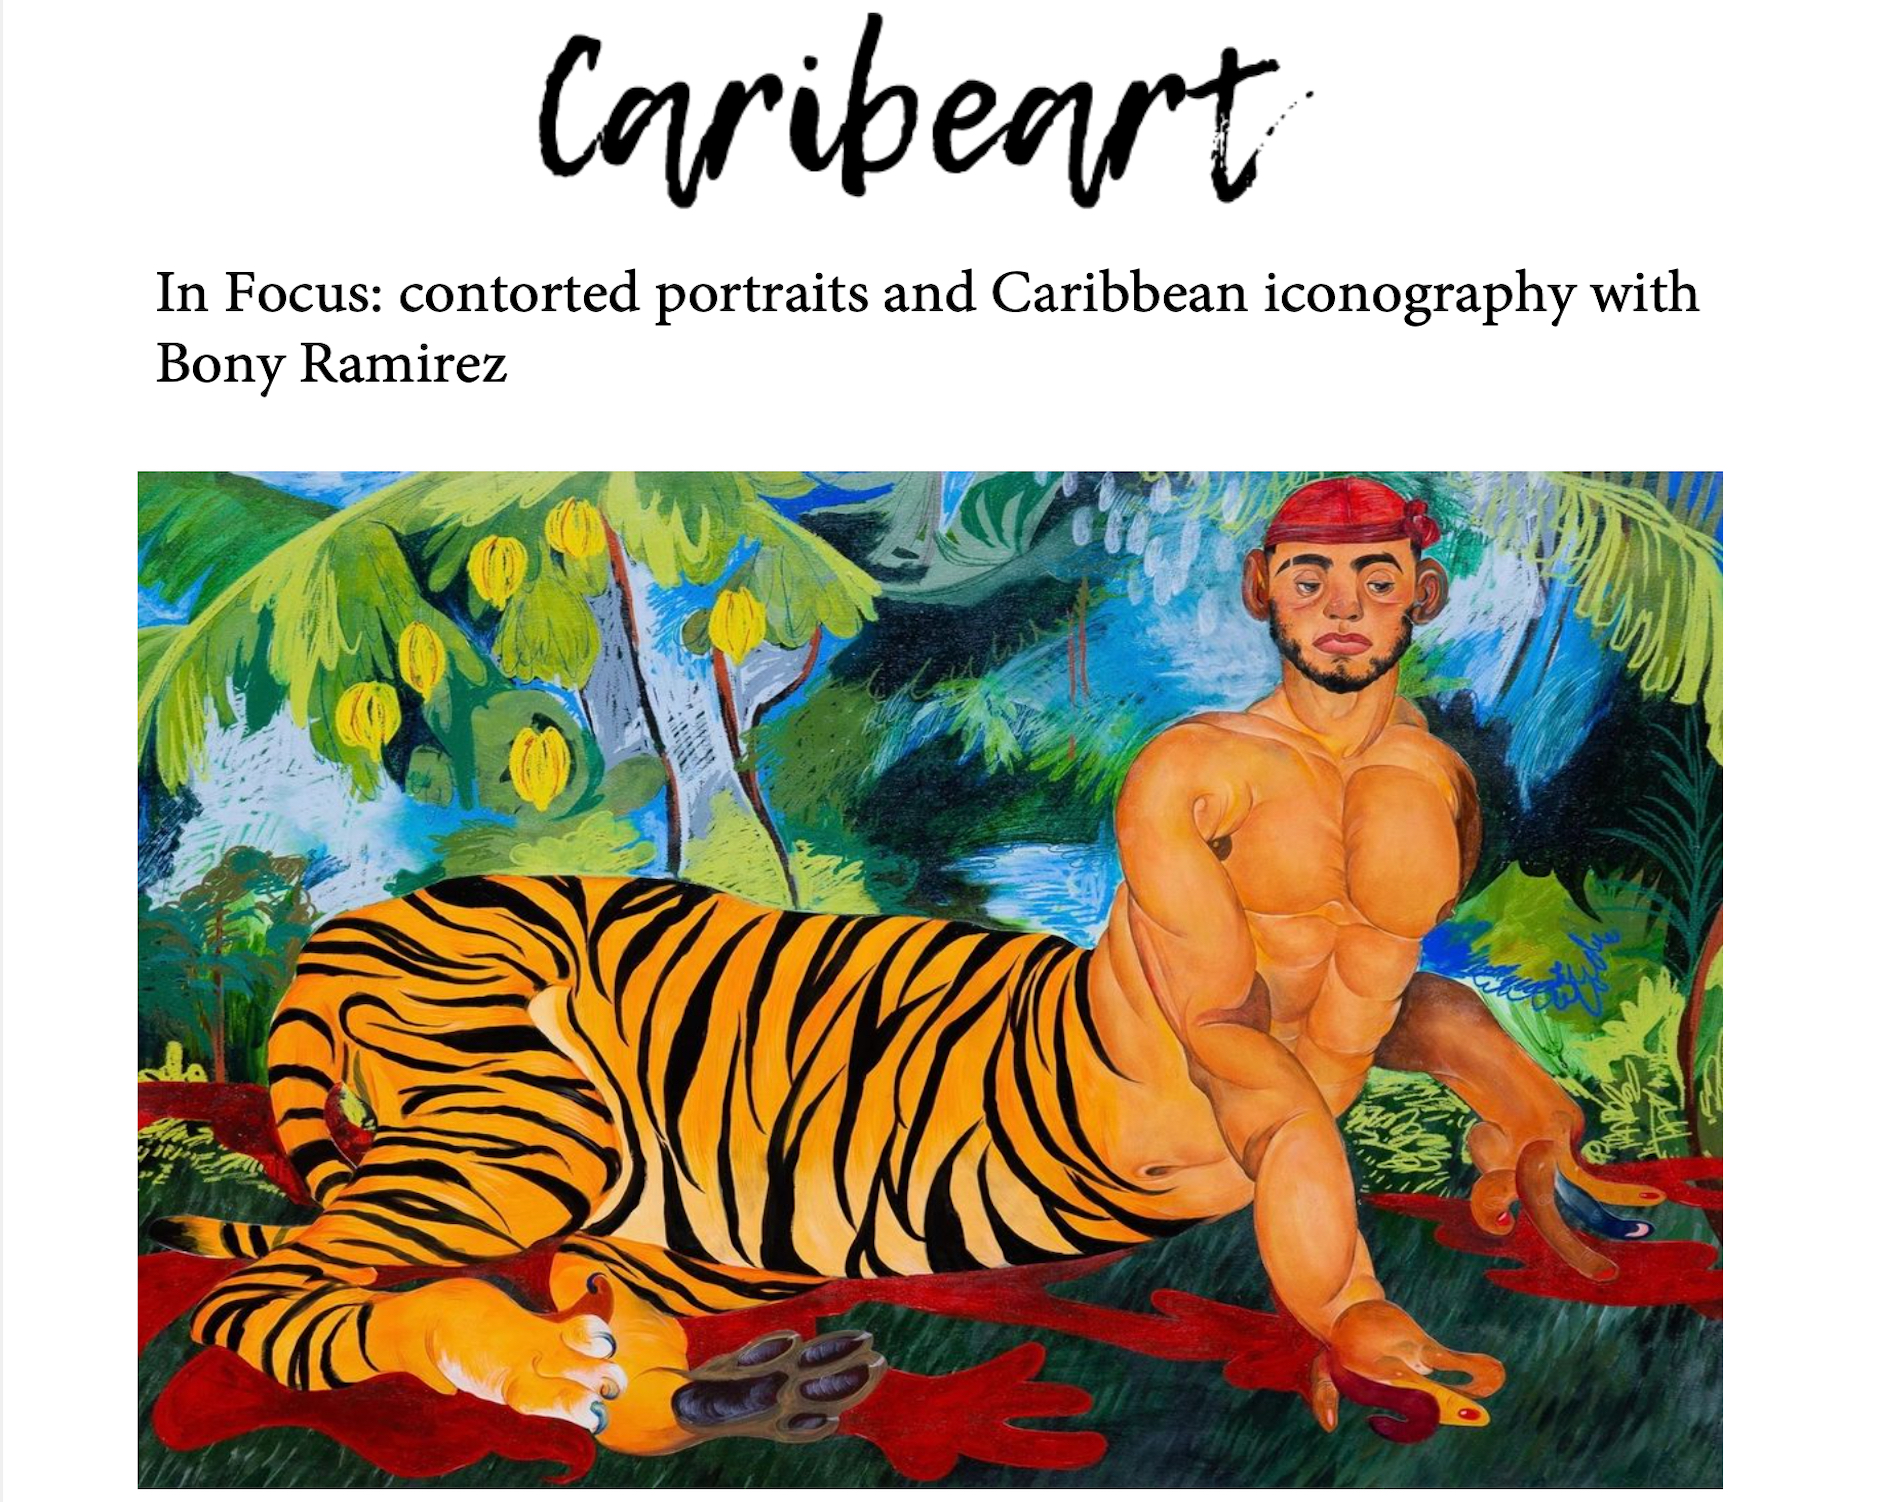 Caribeart, 2022 | In Focus: Contorted Portraits and Caribbean Iconography with Bony Ramirez